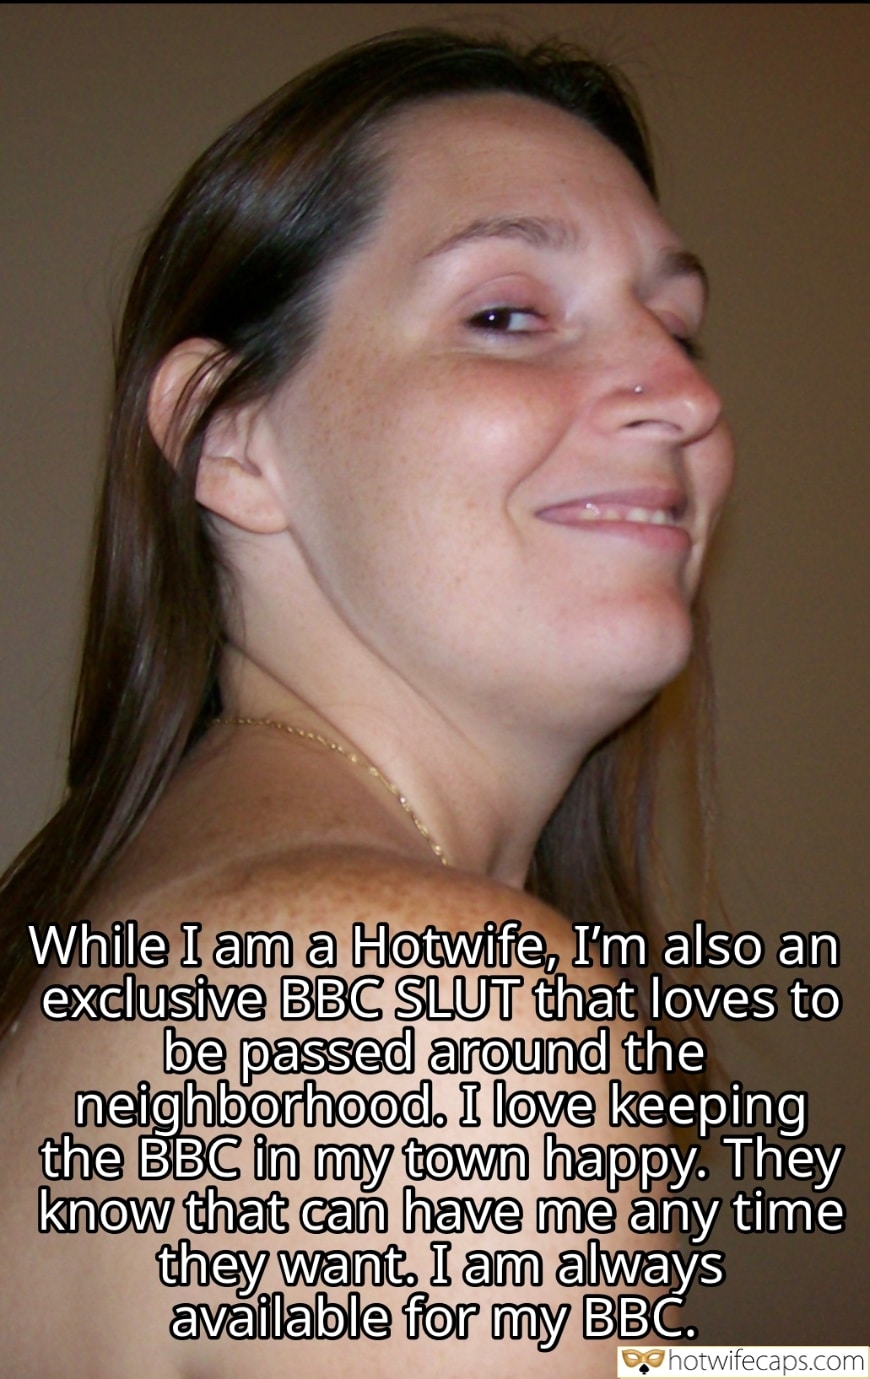 Wife Sharing Bull BBC hotwife caption: While I am a Hotwife, I’m also an exclusive BBC SLUT that loves to be passed around the neighborhood. I love keeping the BBC in my town happy. They know they can have me any time they want. I am...